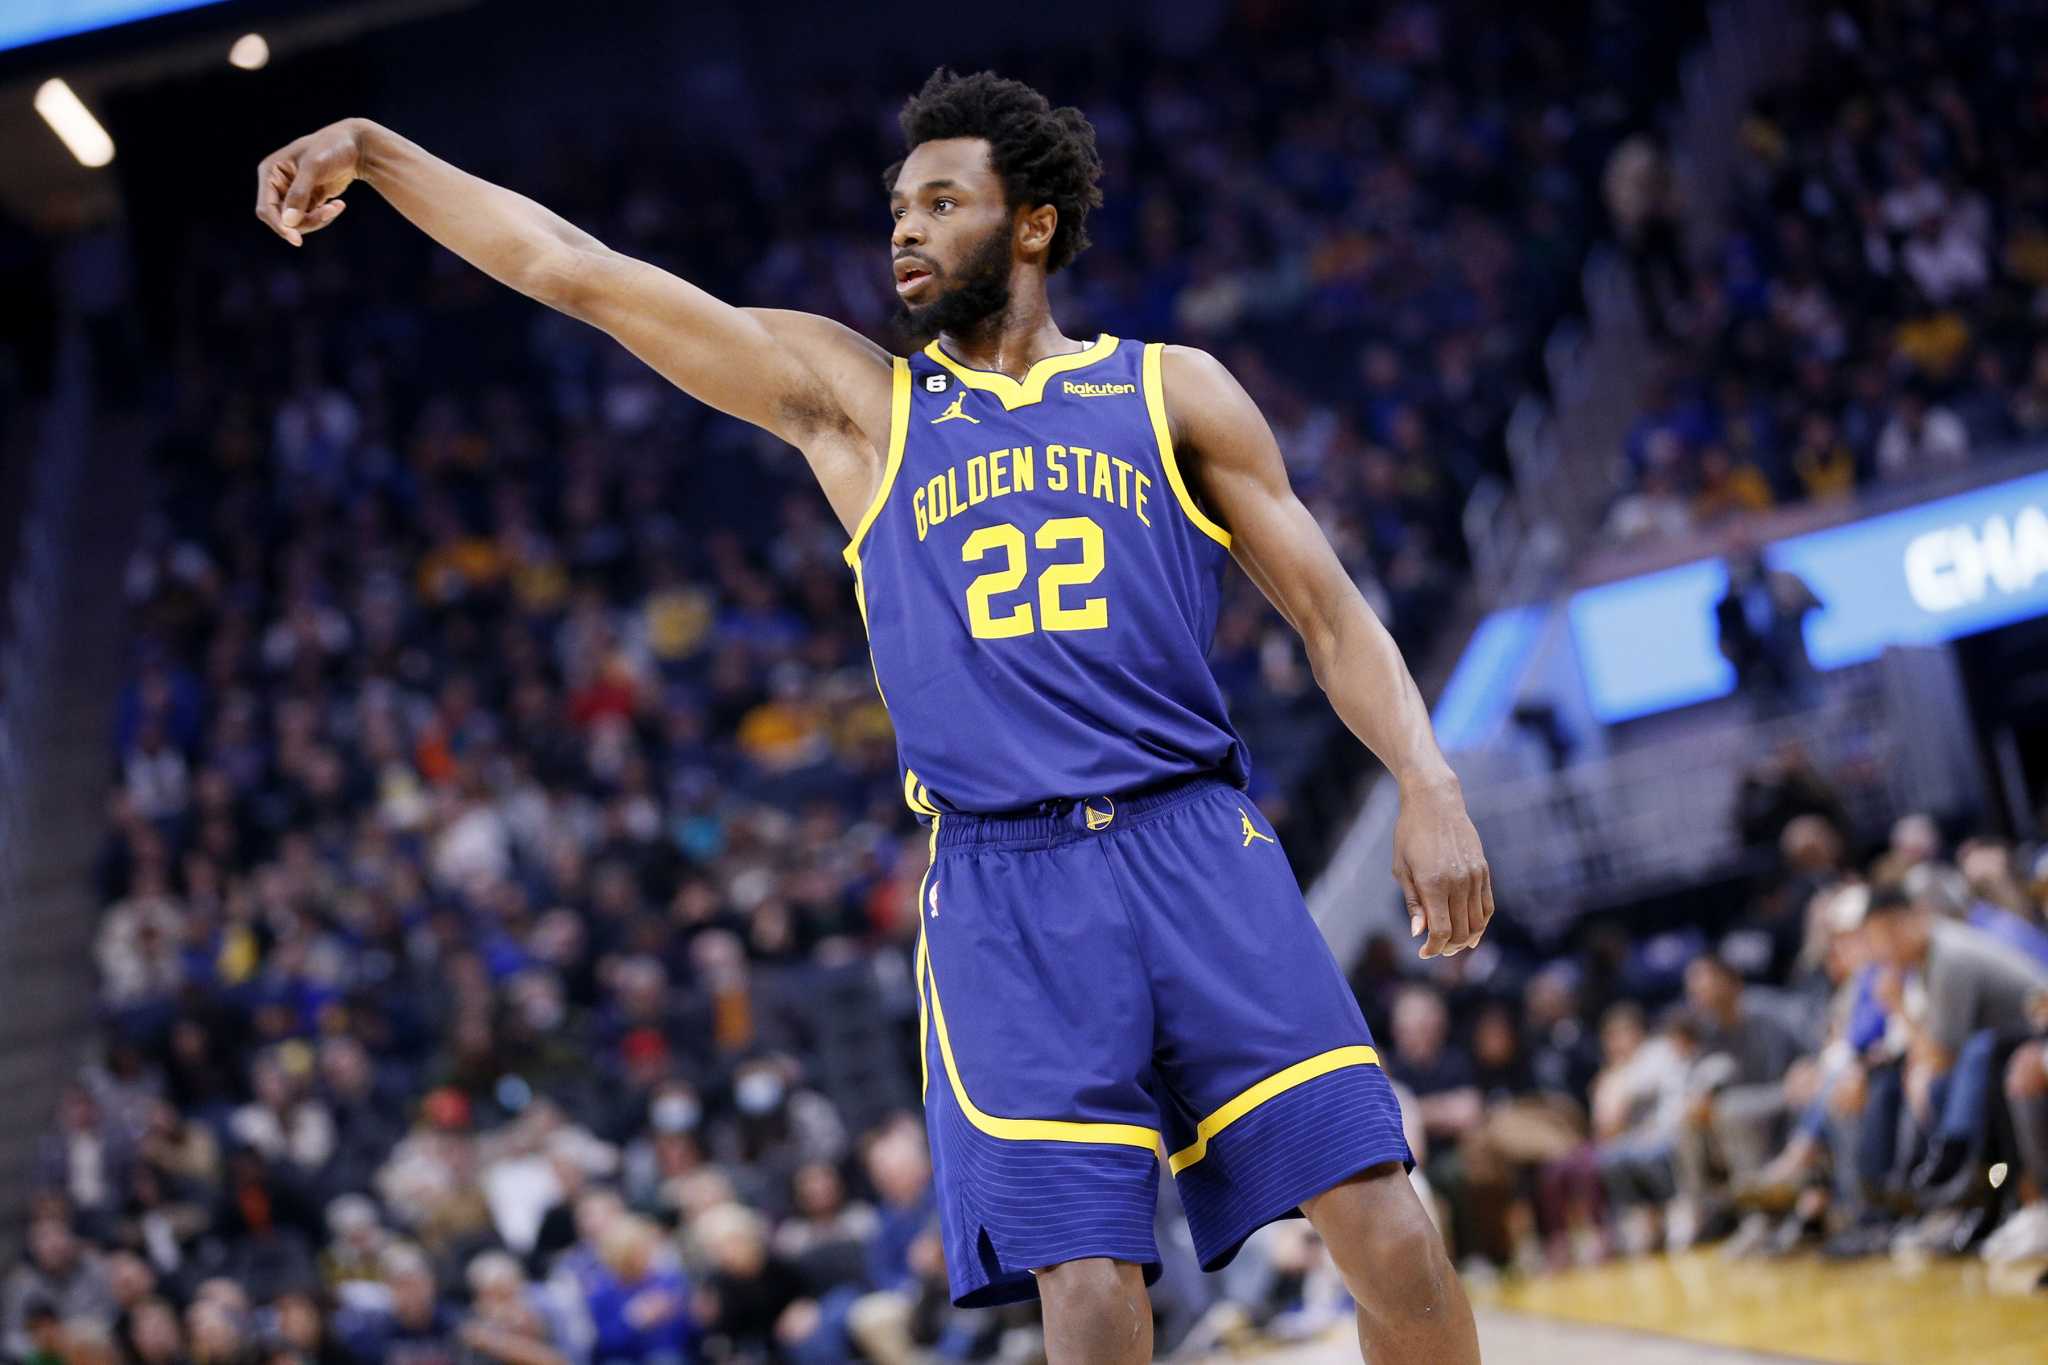 Why Warriors gave up on James Wiseman, who didn't fit, for Gary Payton